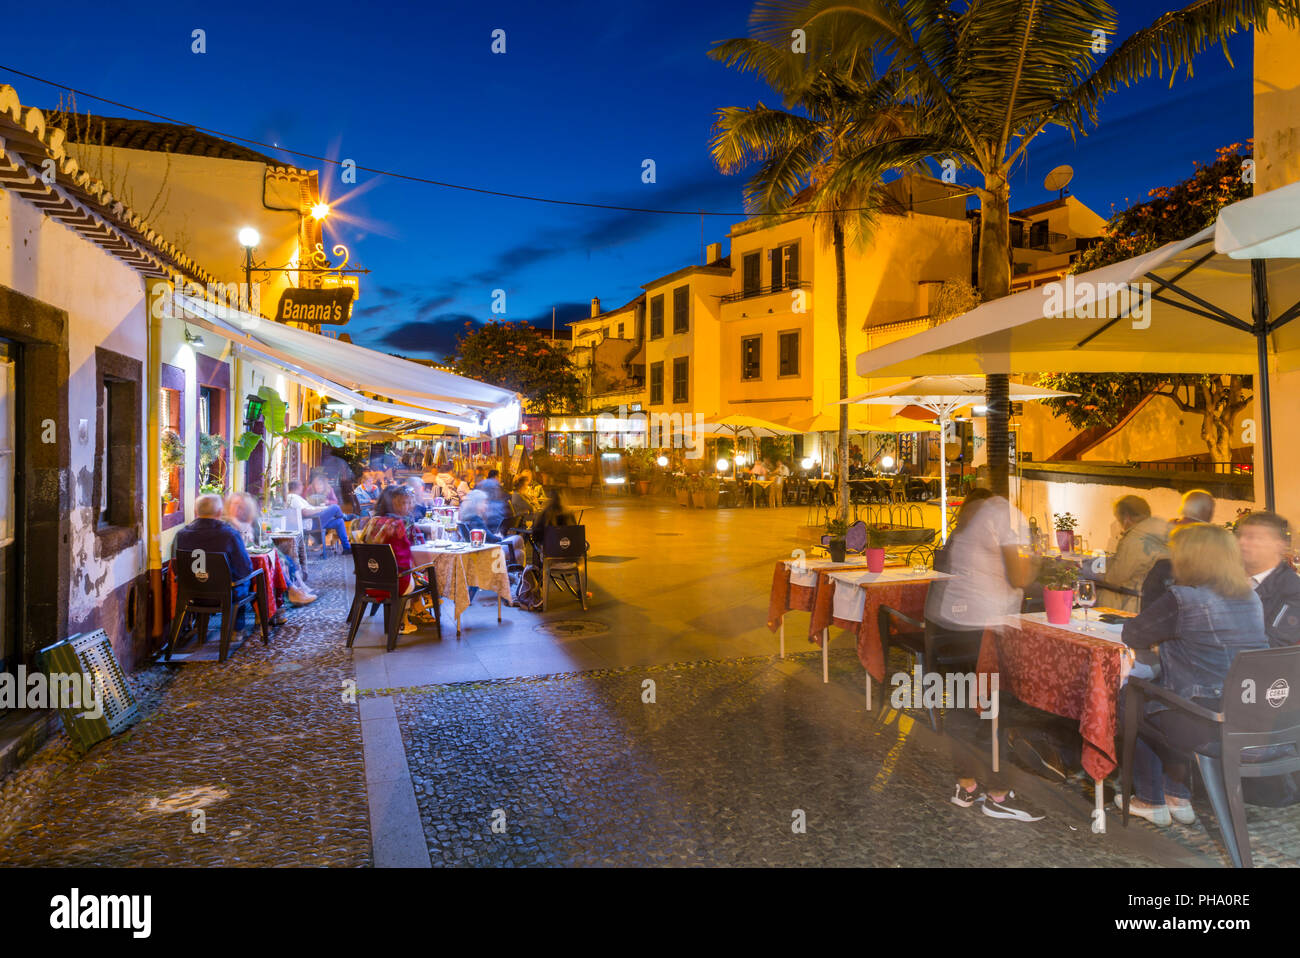 View of cafe in cobbled street in old town at dusk, Funchal, Madeira, Portugal, Europe Stock Photo